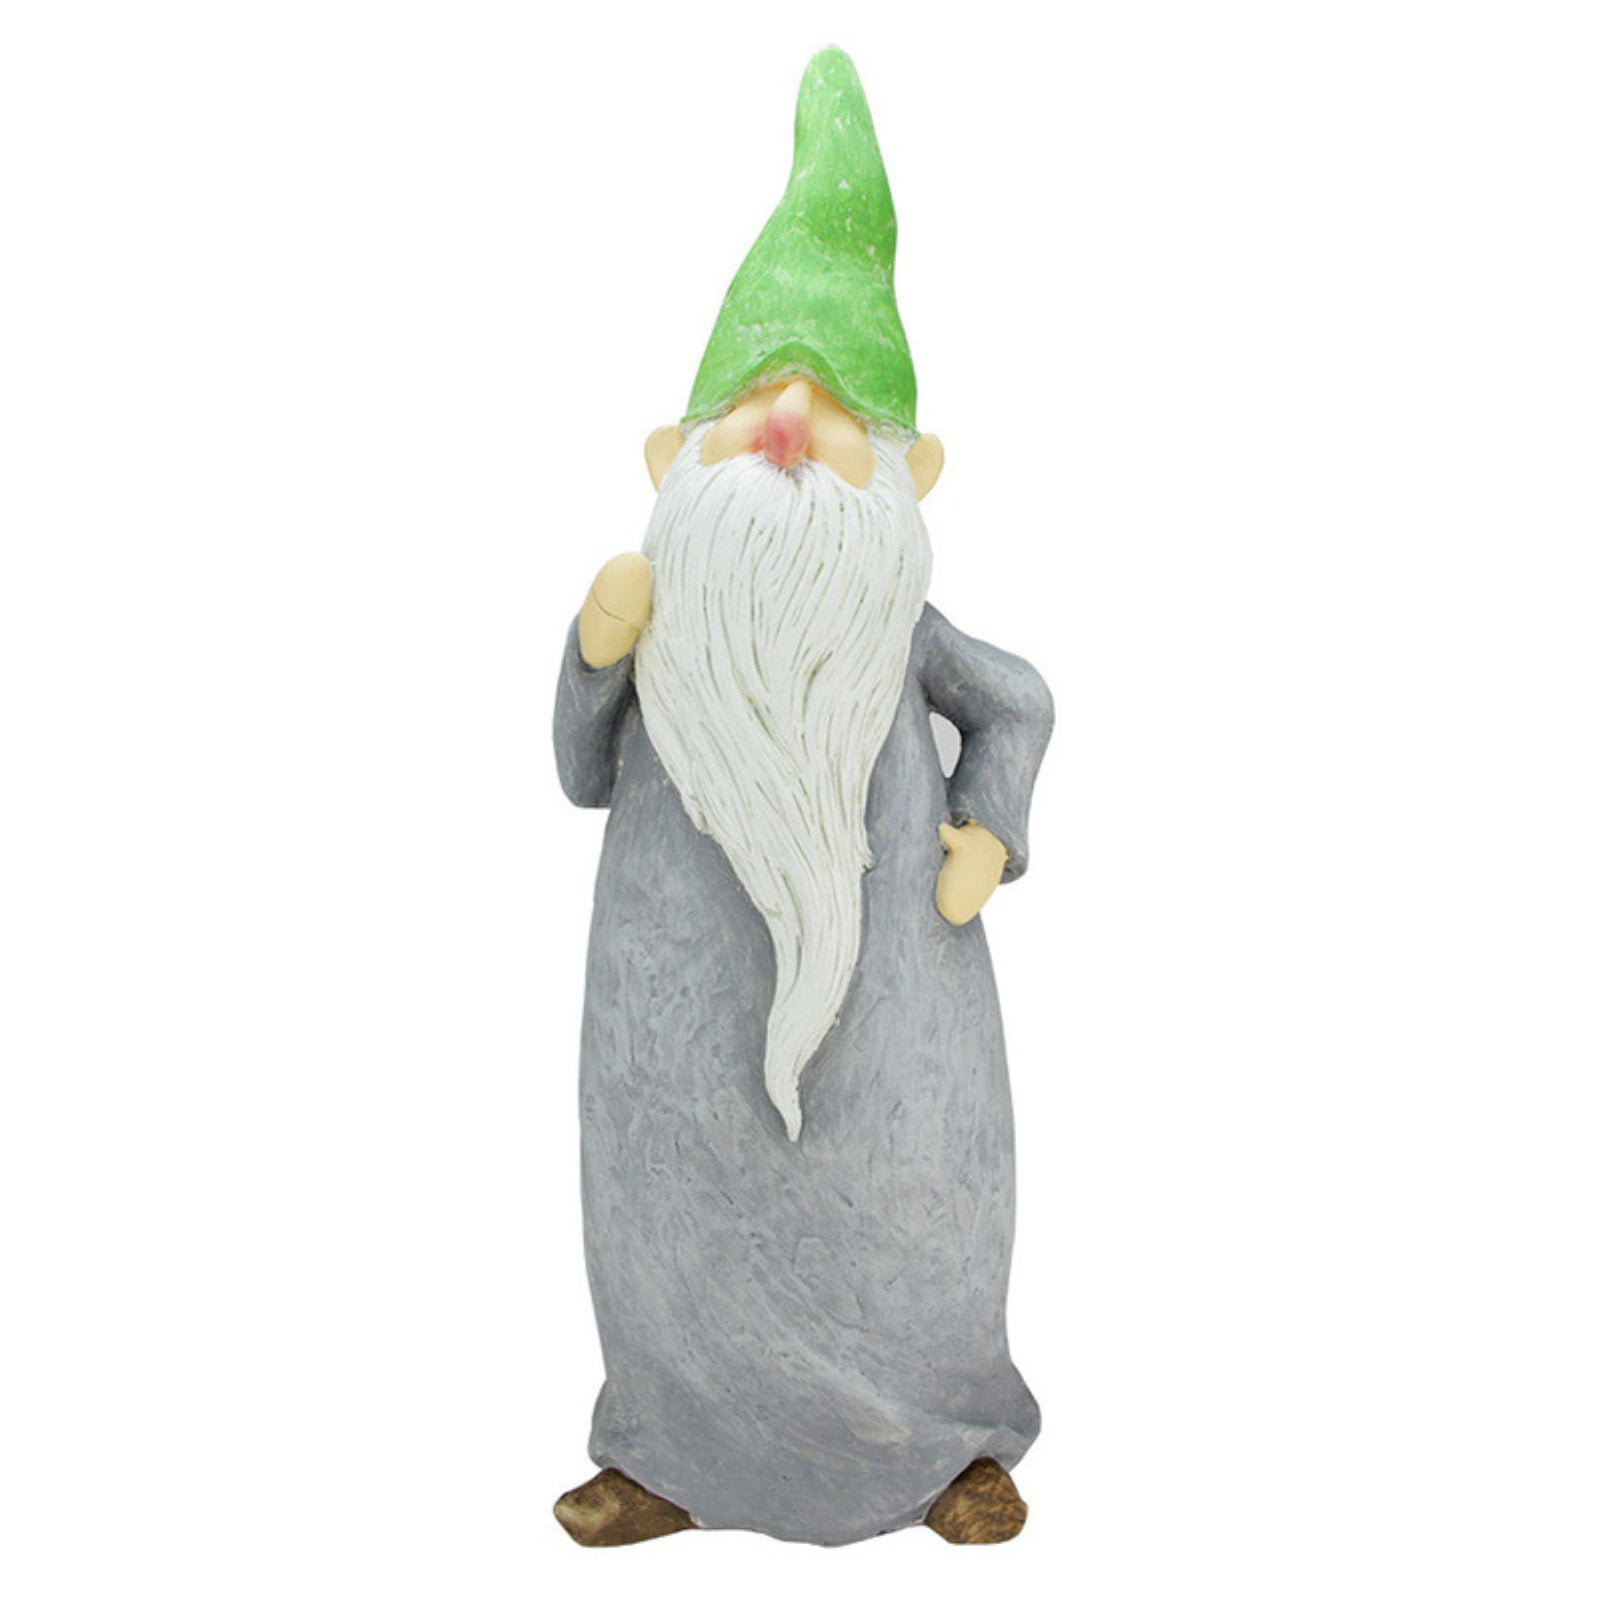 Northlight Standing Gnome with Gray Robe and Green Cap Outdoor Garden ...